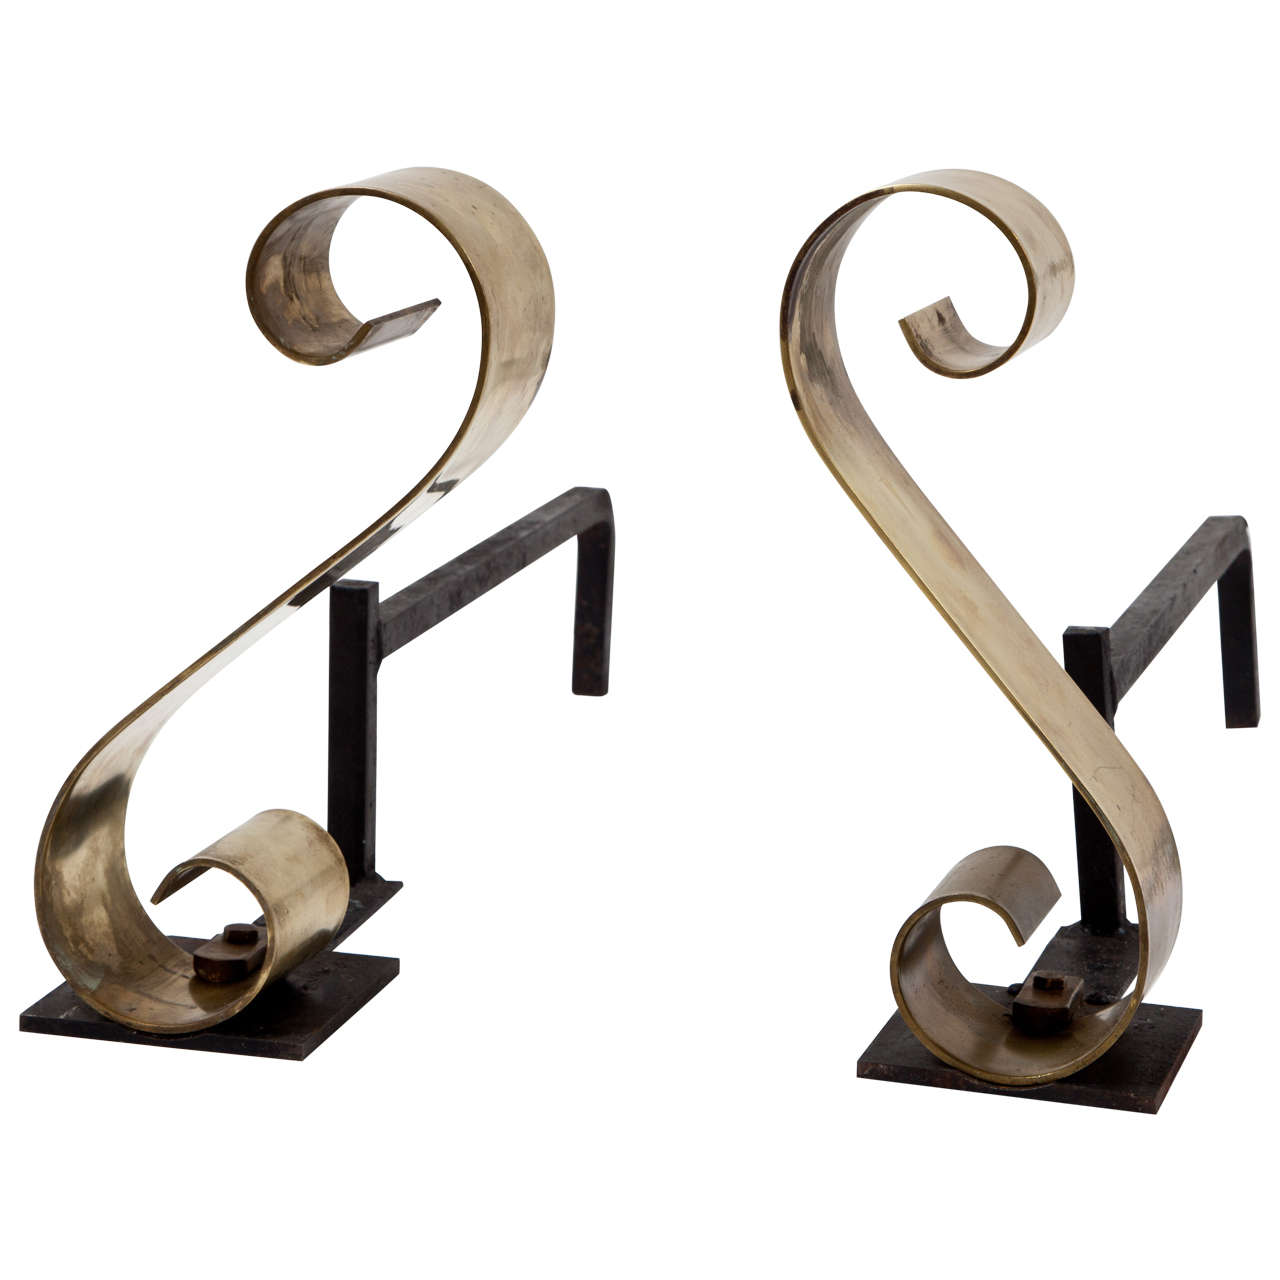 French style Scroll Andirons in Polished Brass